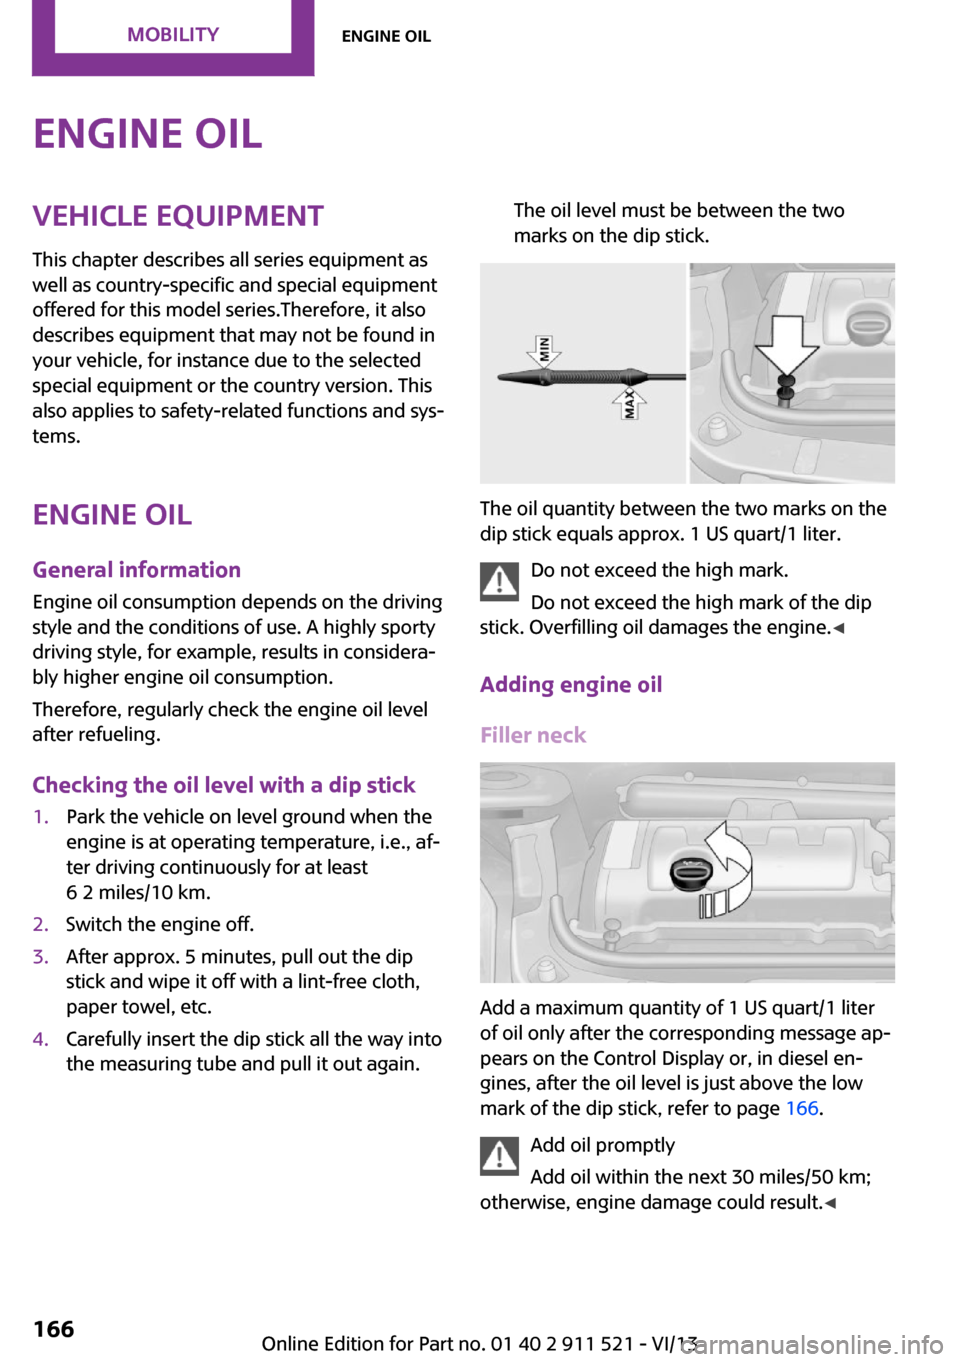 MINI Paceman 2014 User Guide Engine oilVehicle equipment
This chapter describes all series equipment as
well as country-specific and special equipment
offered for this model series.Therefore, it also
describes equipment that may 